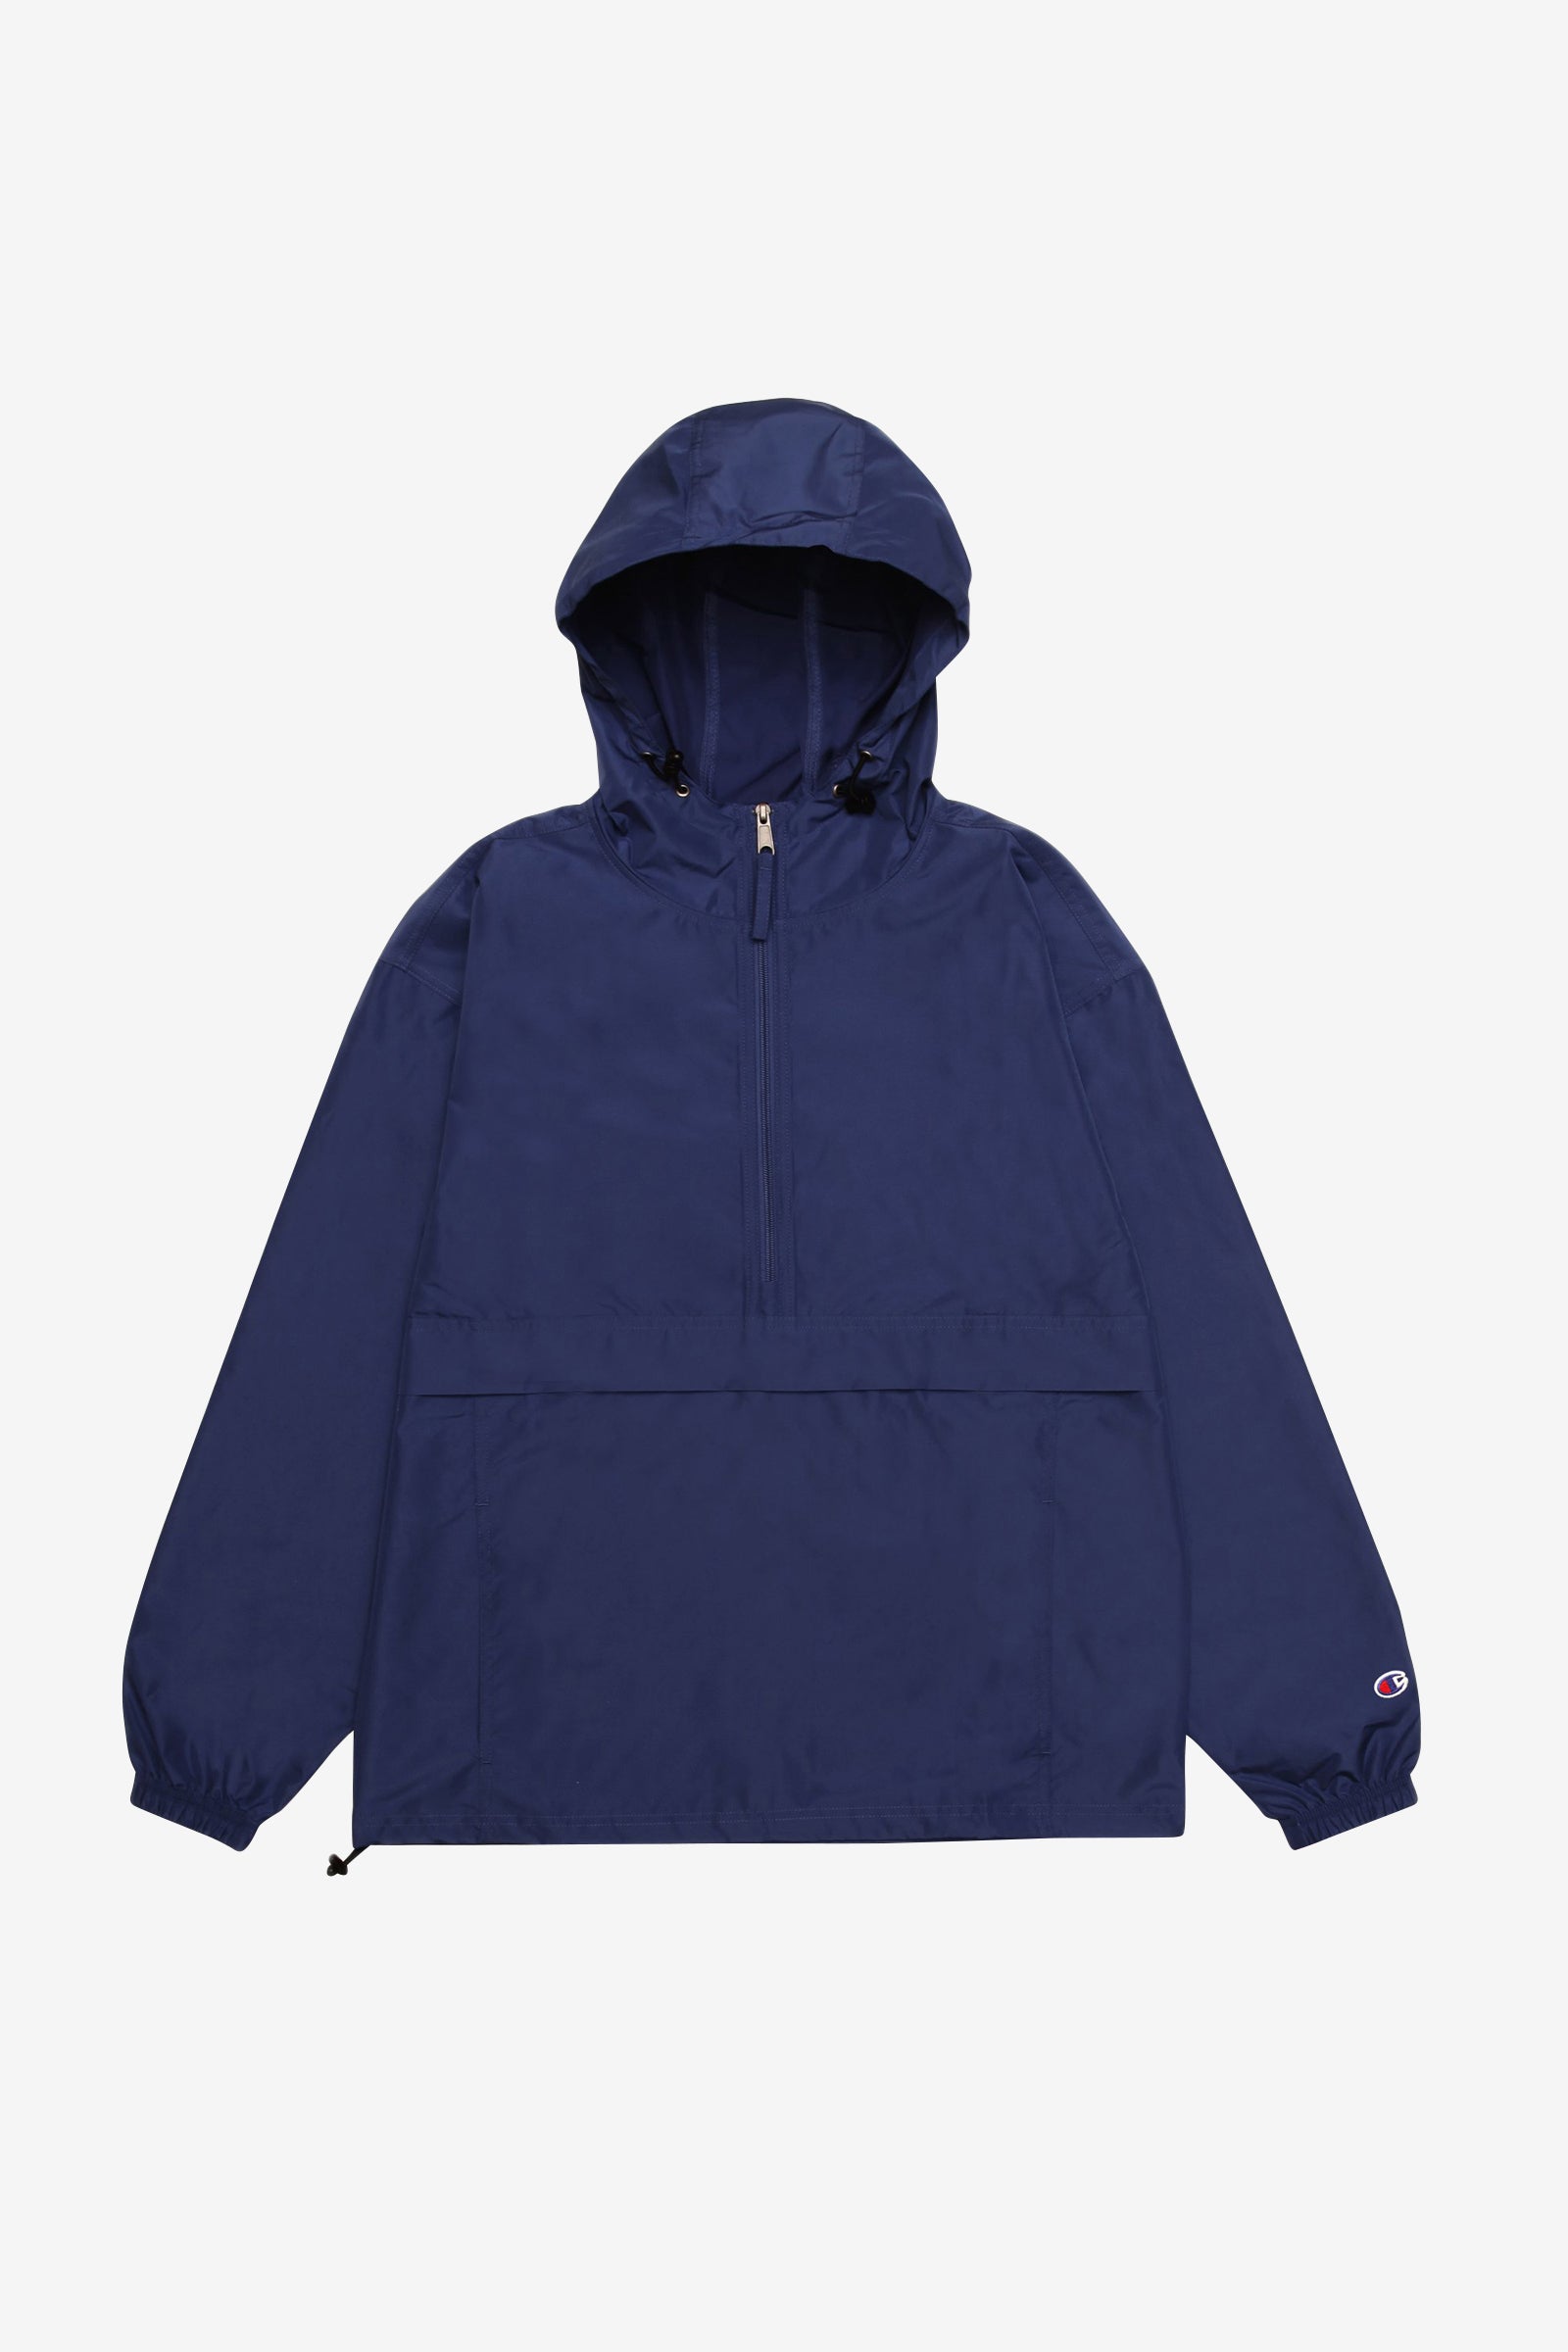 Champion - Packable Hooded Anorak Jacket - Navy